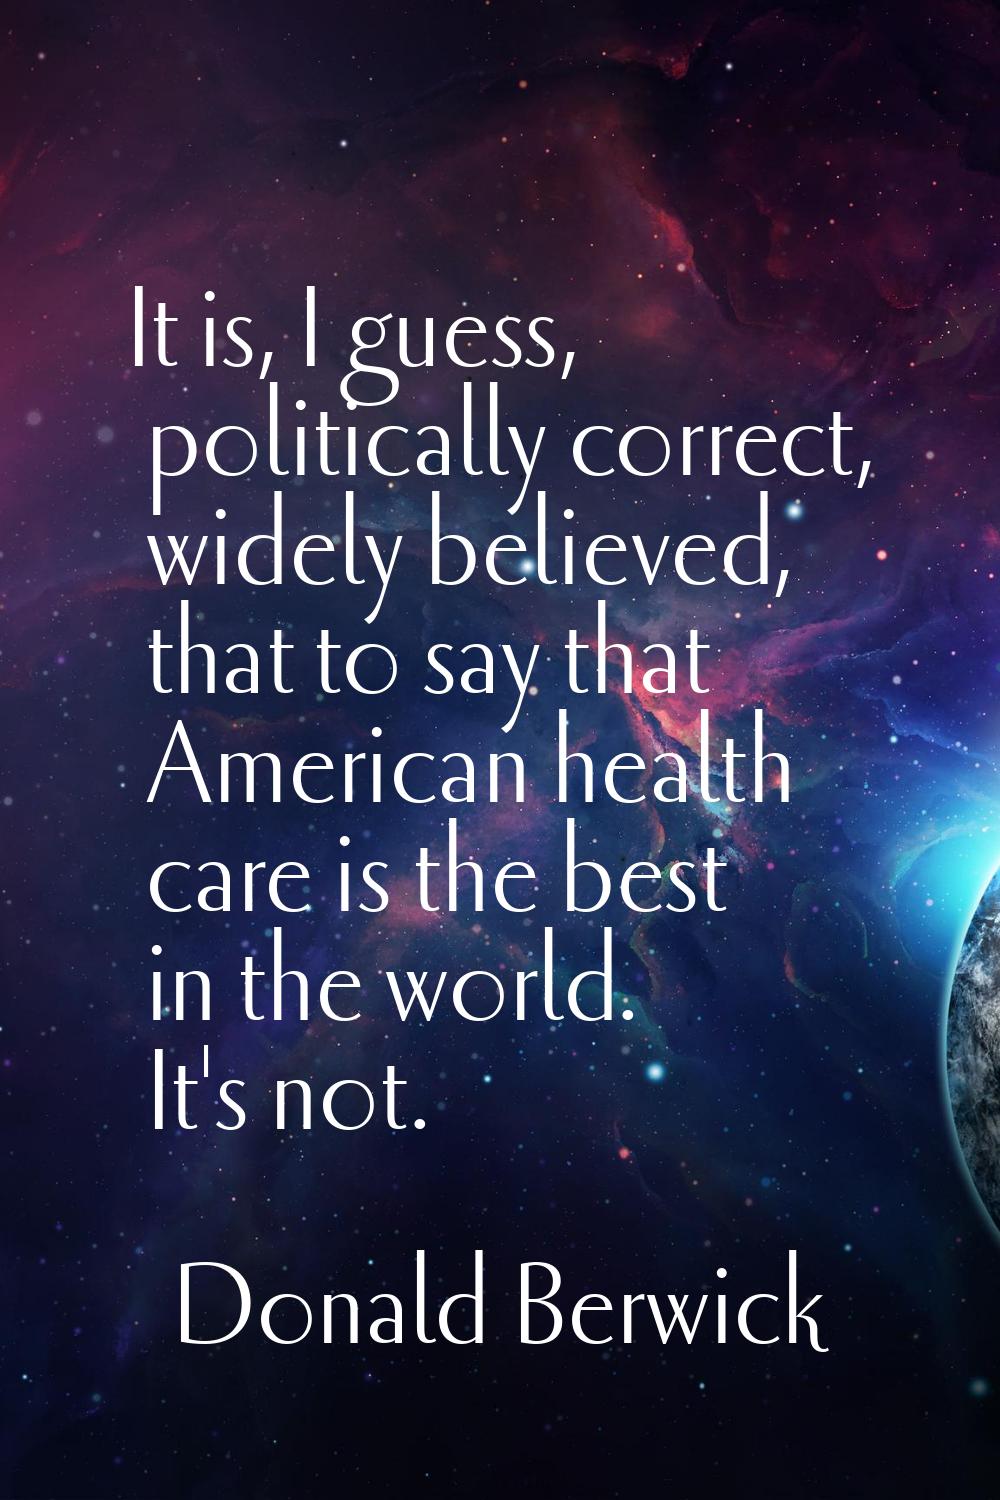 It is, I guess, politically correct, widely believed, that to say that American health care is the 